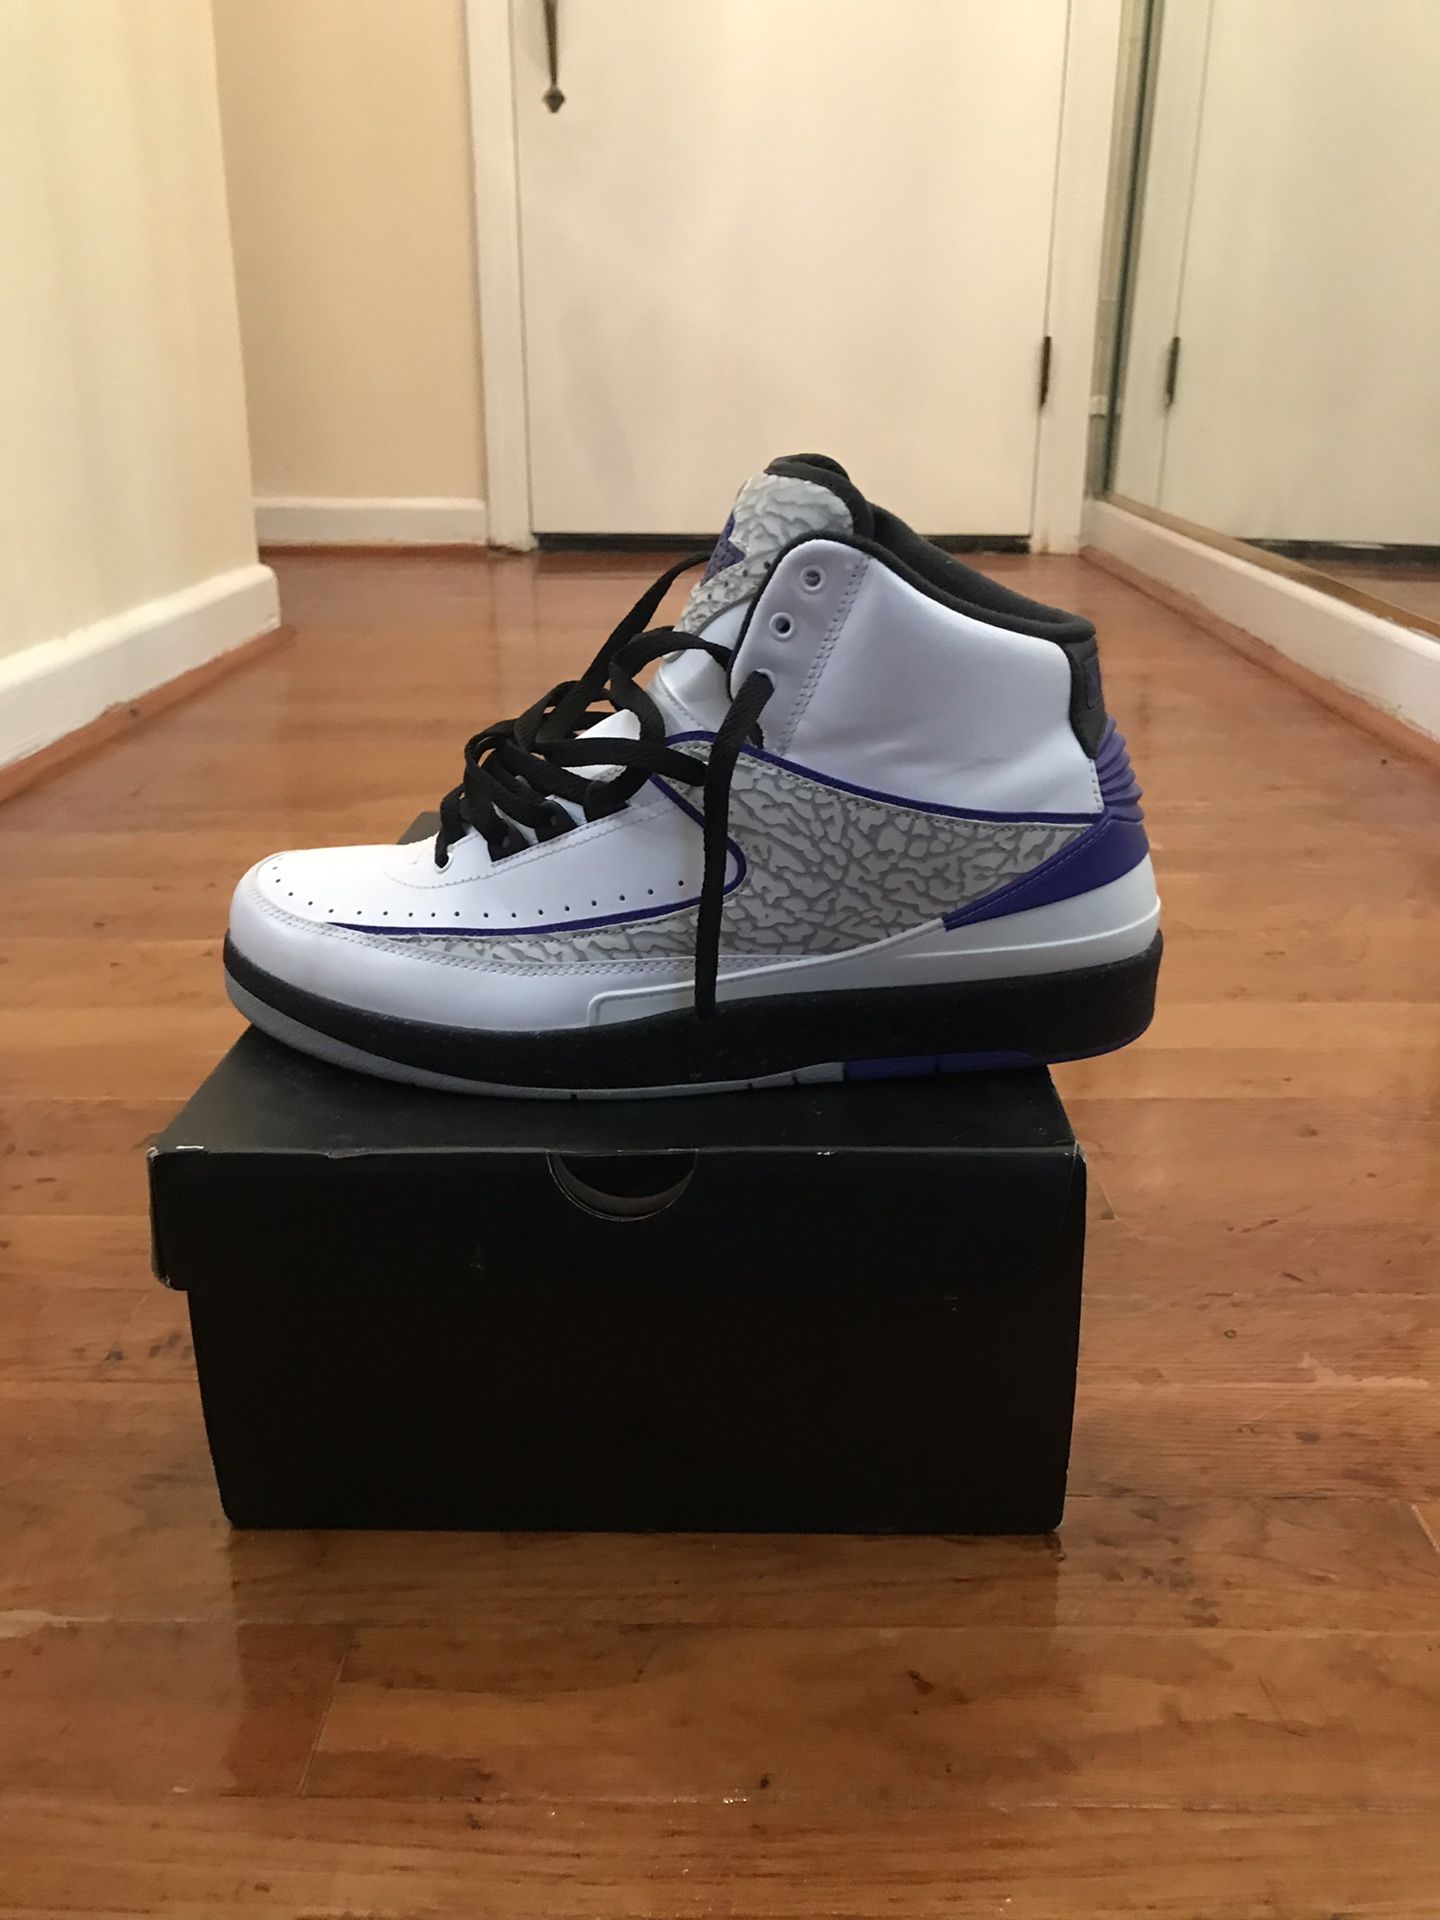 Air Jordan Retro 2 size 10 excellent condition first come first serve